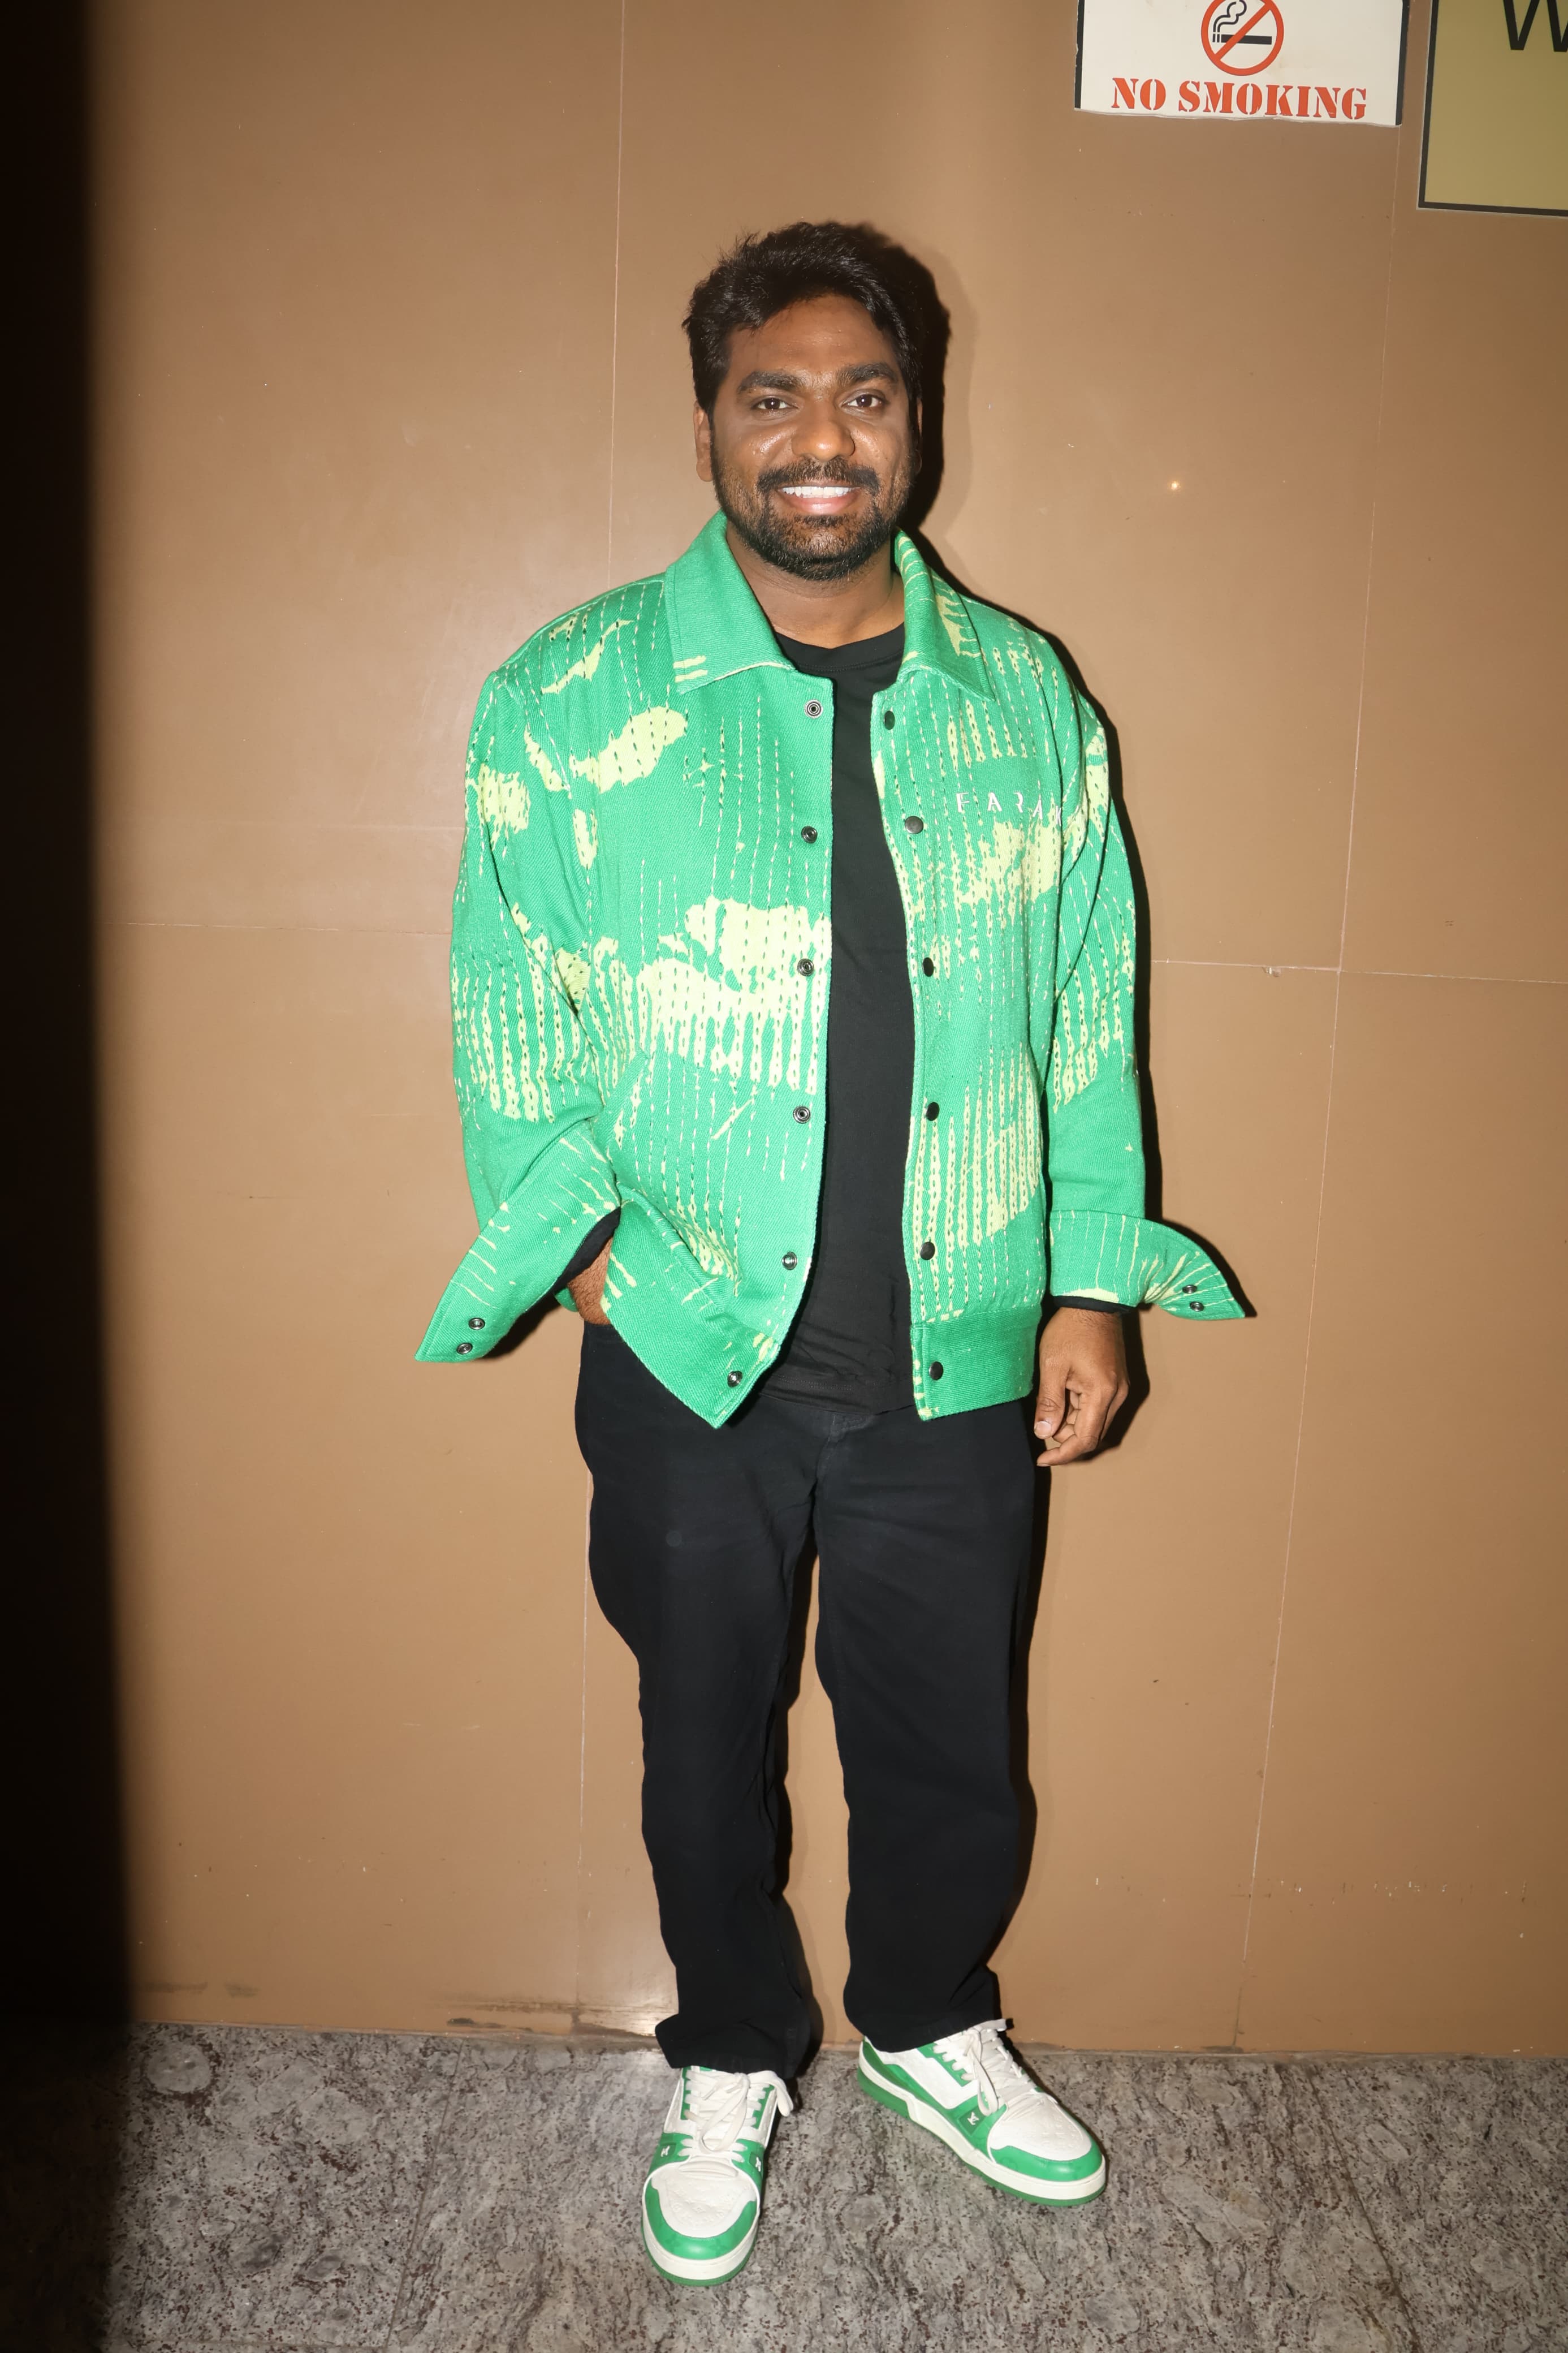 Ace stand-up comedian Zakir Khan was also snapped at the screening of the Vidya Balan and Pratik Gandhi starrer